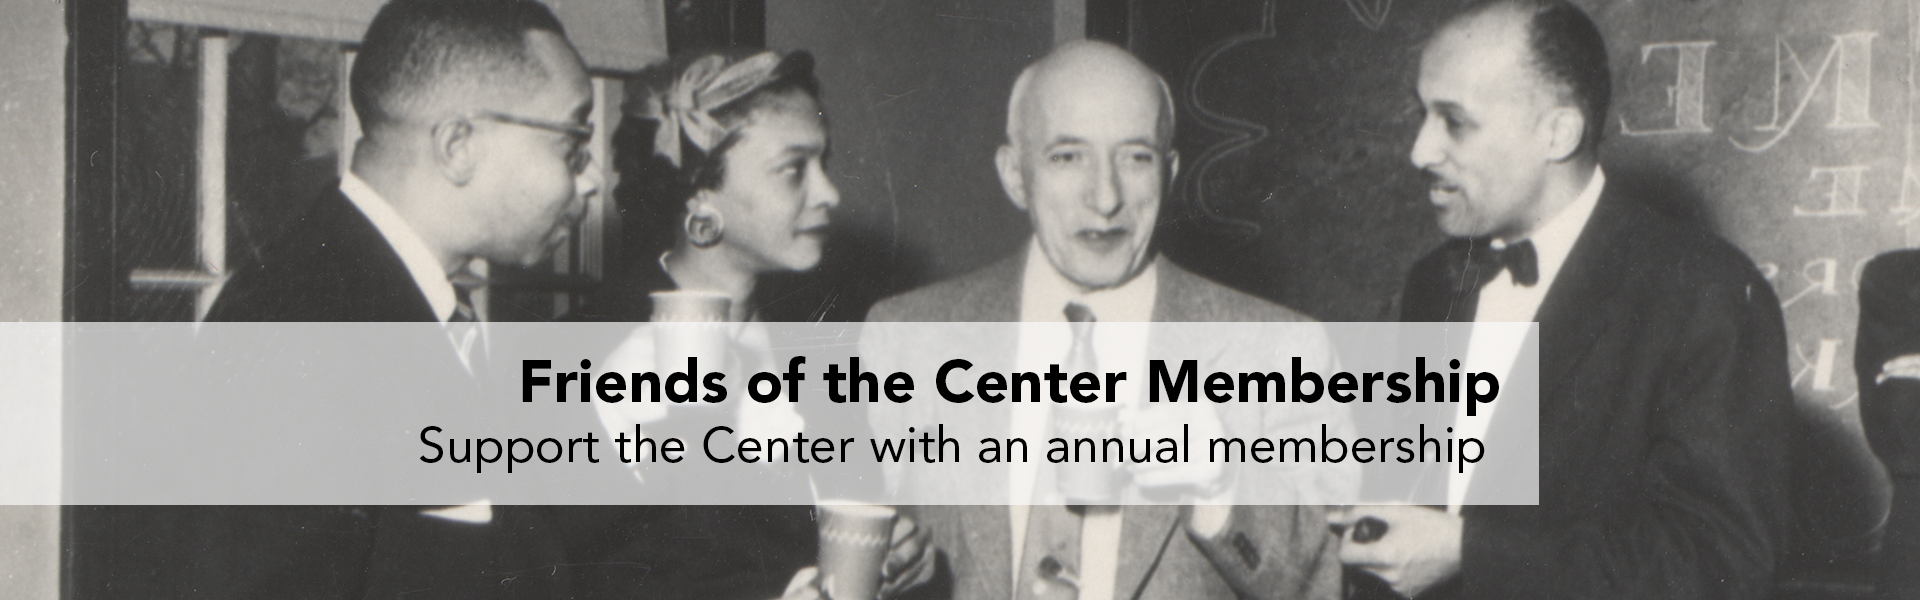 Support the Center with an annual membership